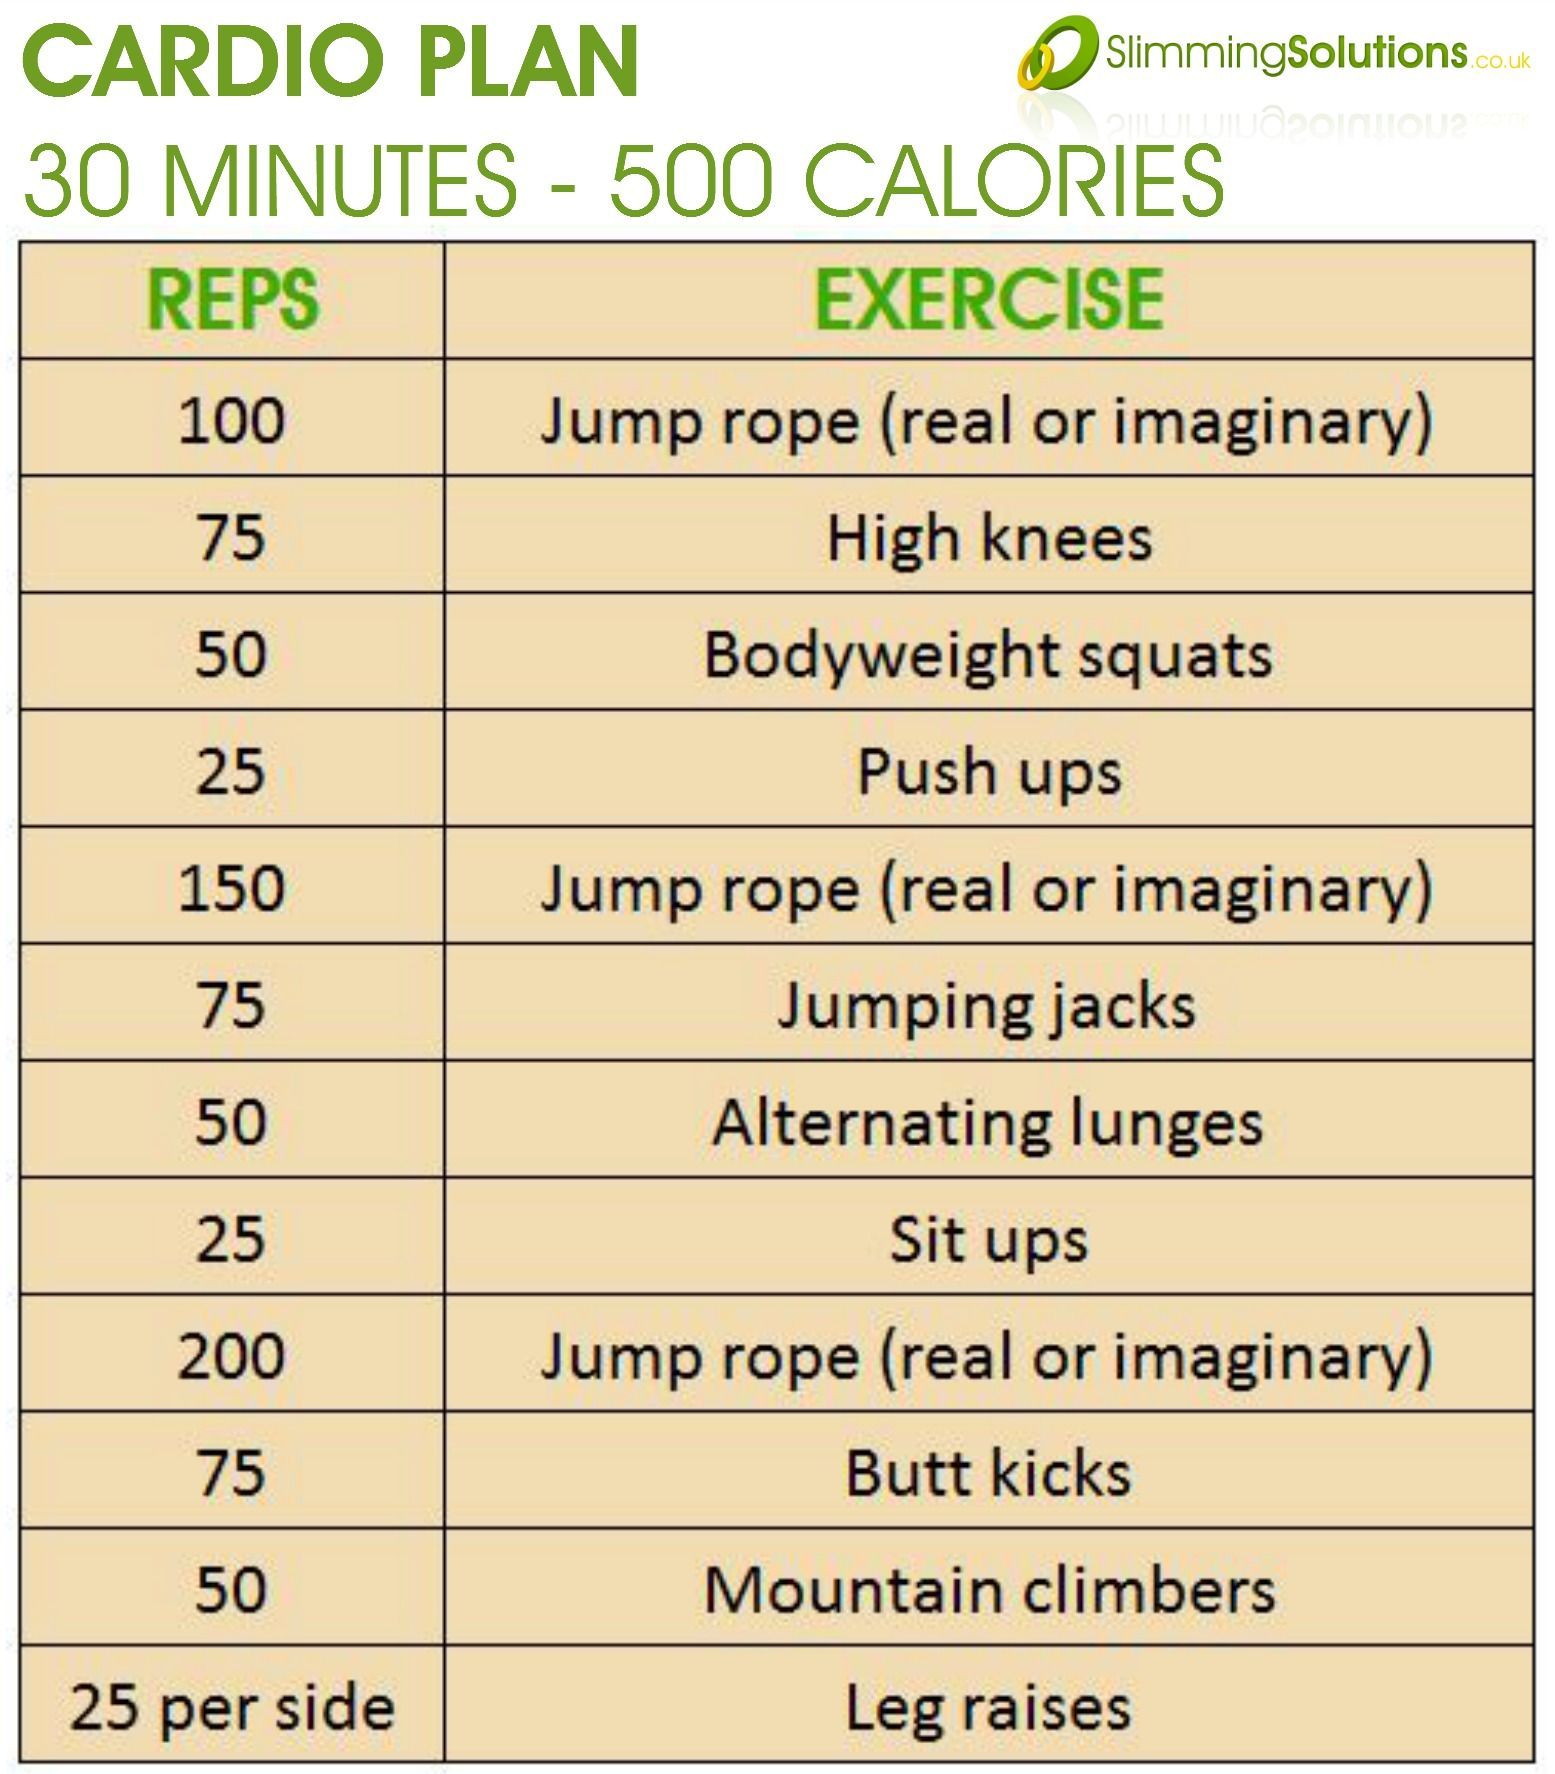 Burn 500 calories in 30 minutes with this easy to follow cardio exercise workout plan